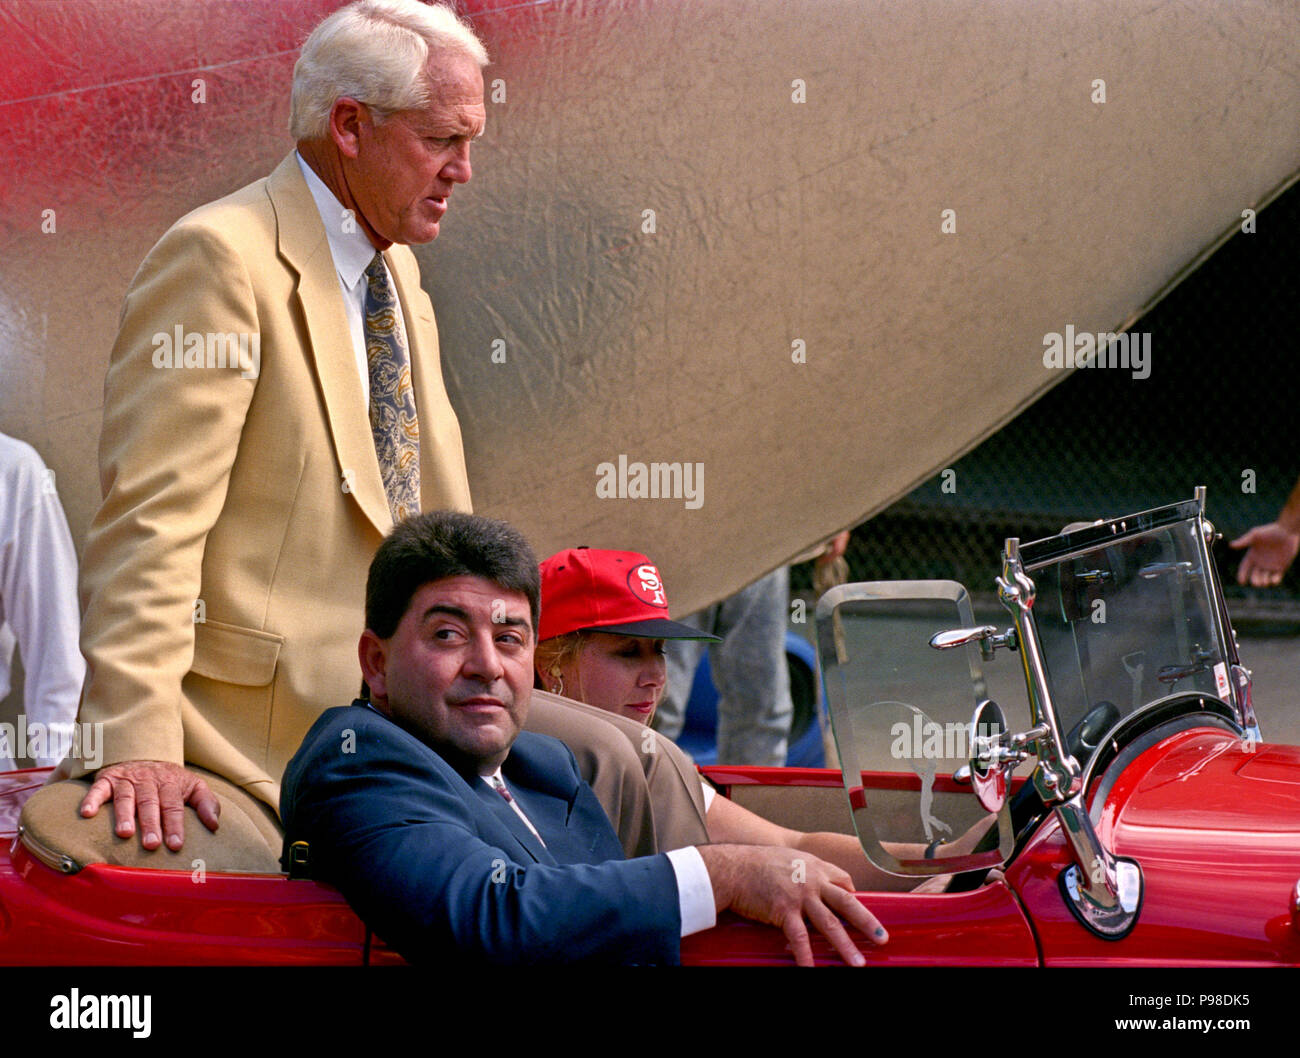 September 19, 1993 - San Francisco, California, U.S - San Francisco 49ers vs. Atlanta Falcons at Candlestick Park Sunday, September 19,1993.  49ers beat Falcons 37-30.   Halftime ceremonies celebrate former head coach Bill Walsh induction to the Football Hall of Fame.  Eddie Debartolo siting in car with Walsh. (Credit Image: © Al Golub via ZUMA Wire) Stock Photo